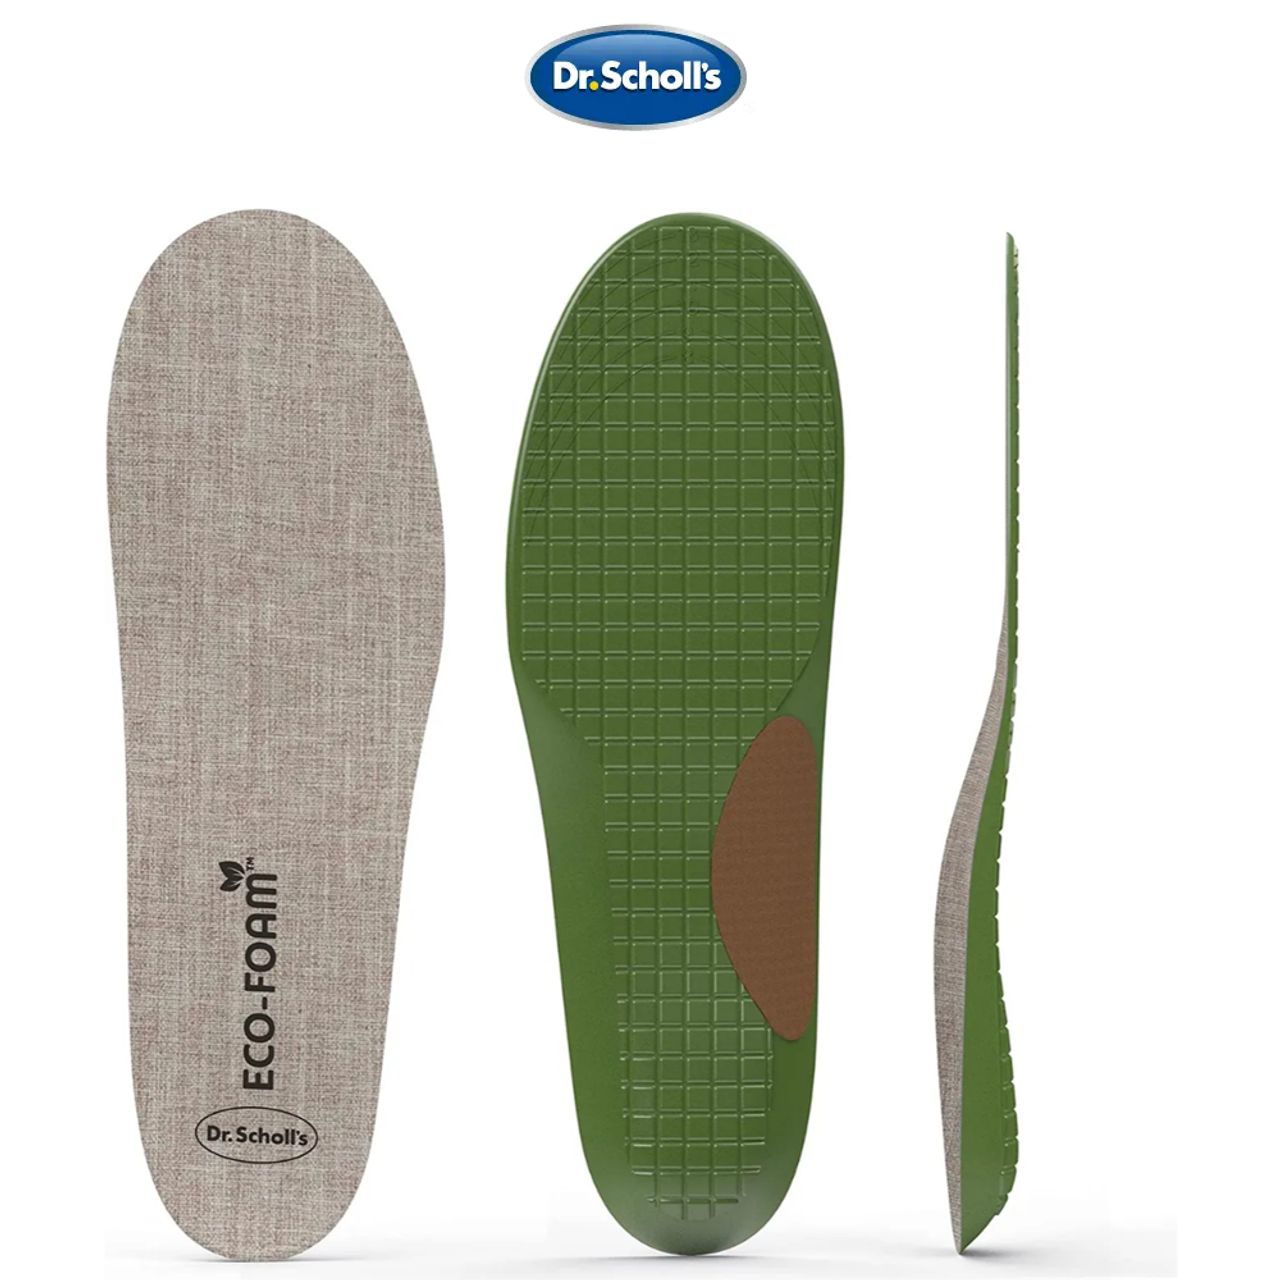 Dr. Scholl's® Eco-Foam™ All-Day Insoles (Men's 8-14 / Women's 6-10) product image